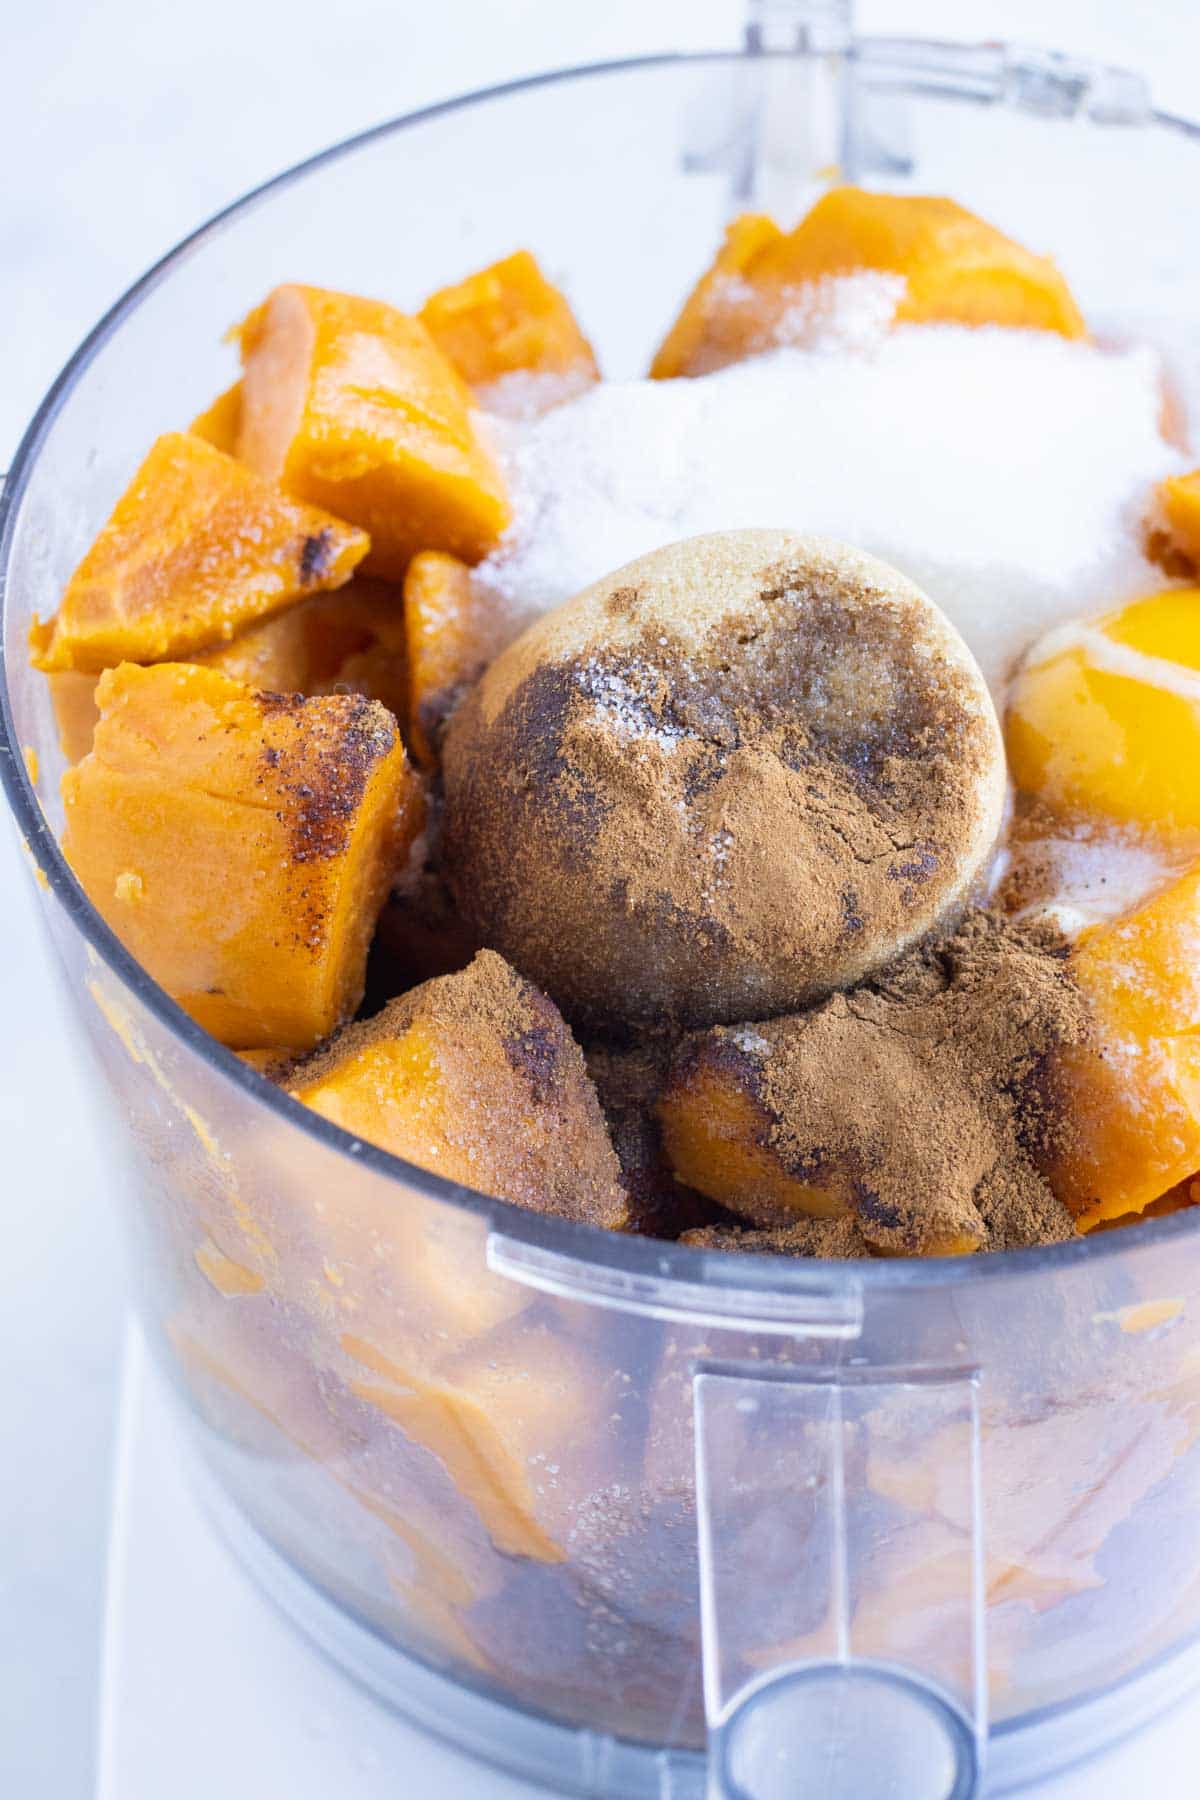 Boiled sweet potatoes are mixed in a food processor with cinnamon, sugar, eggs, and butter.